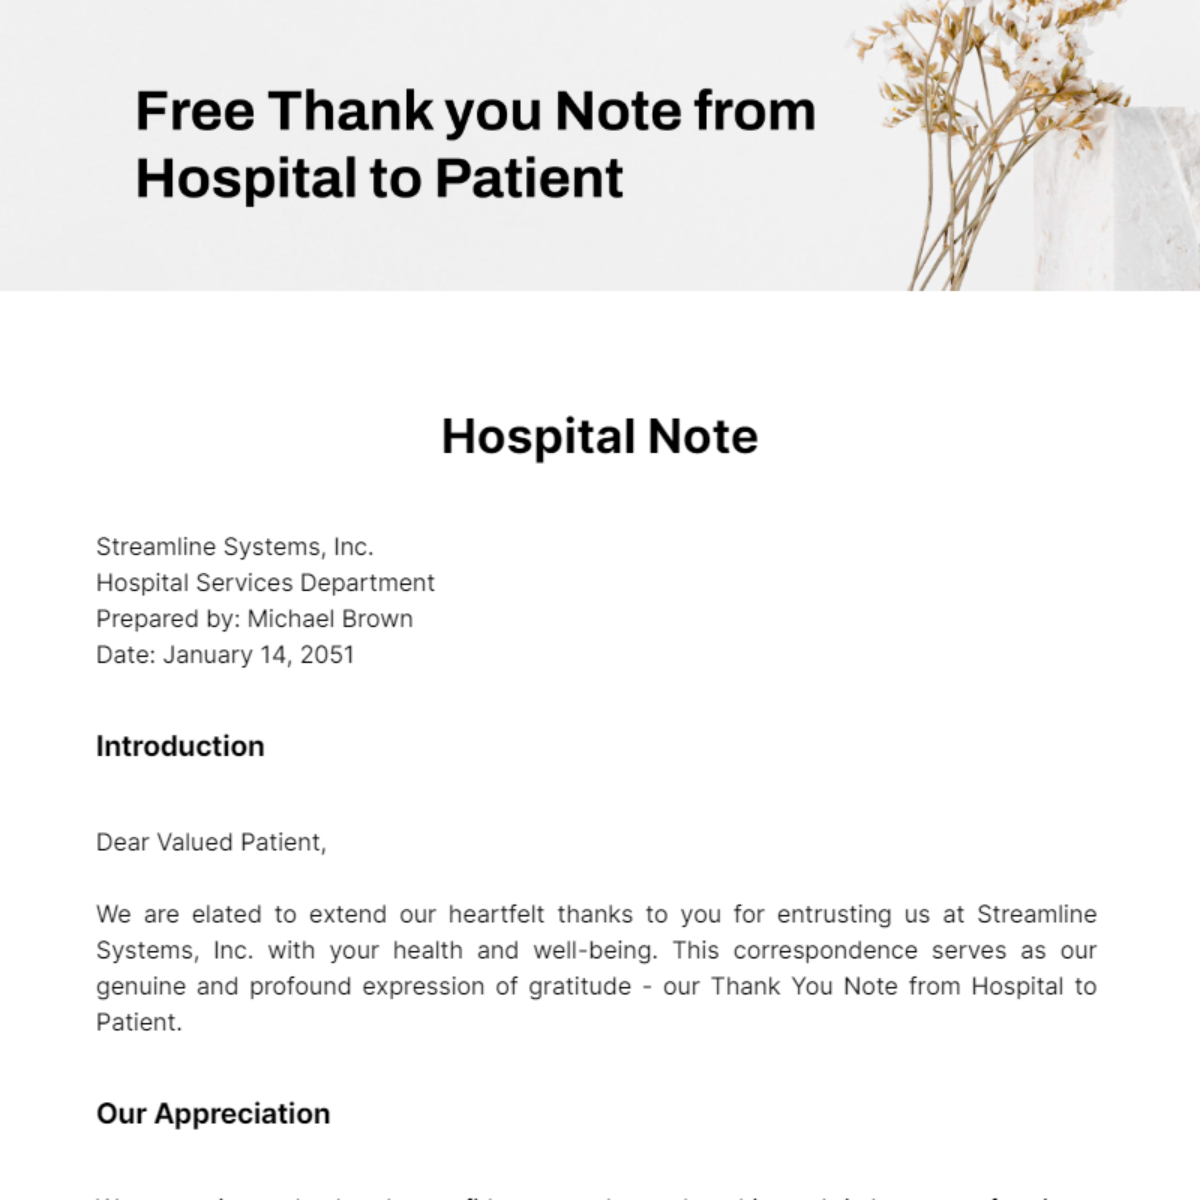 Thank you Note from Hospital to Patient Template